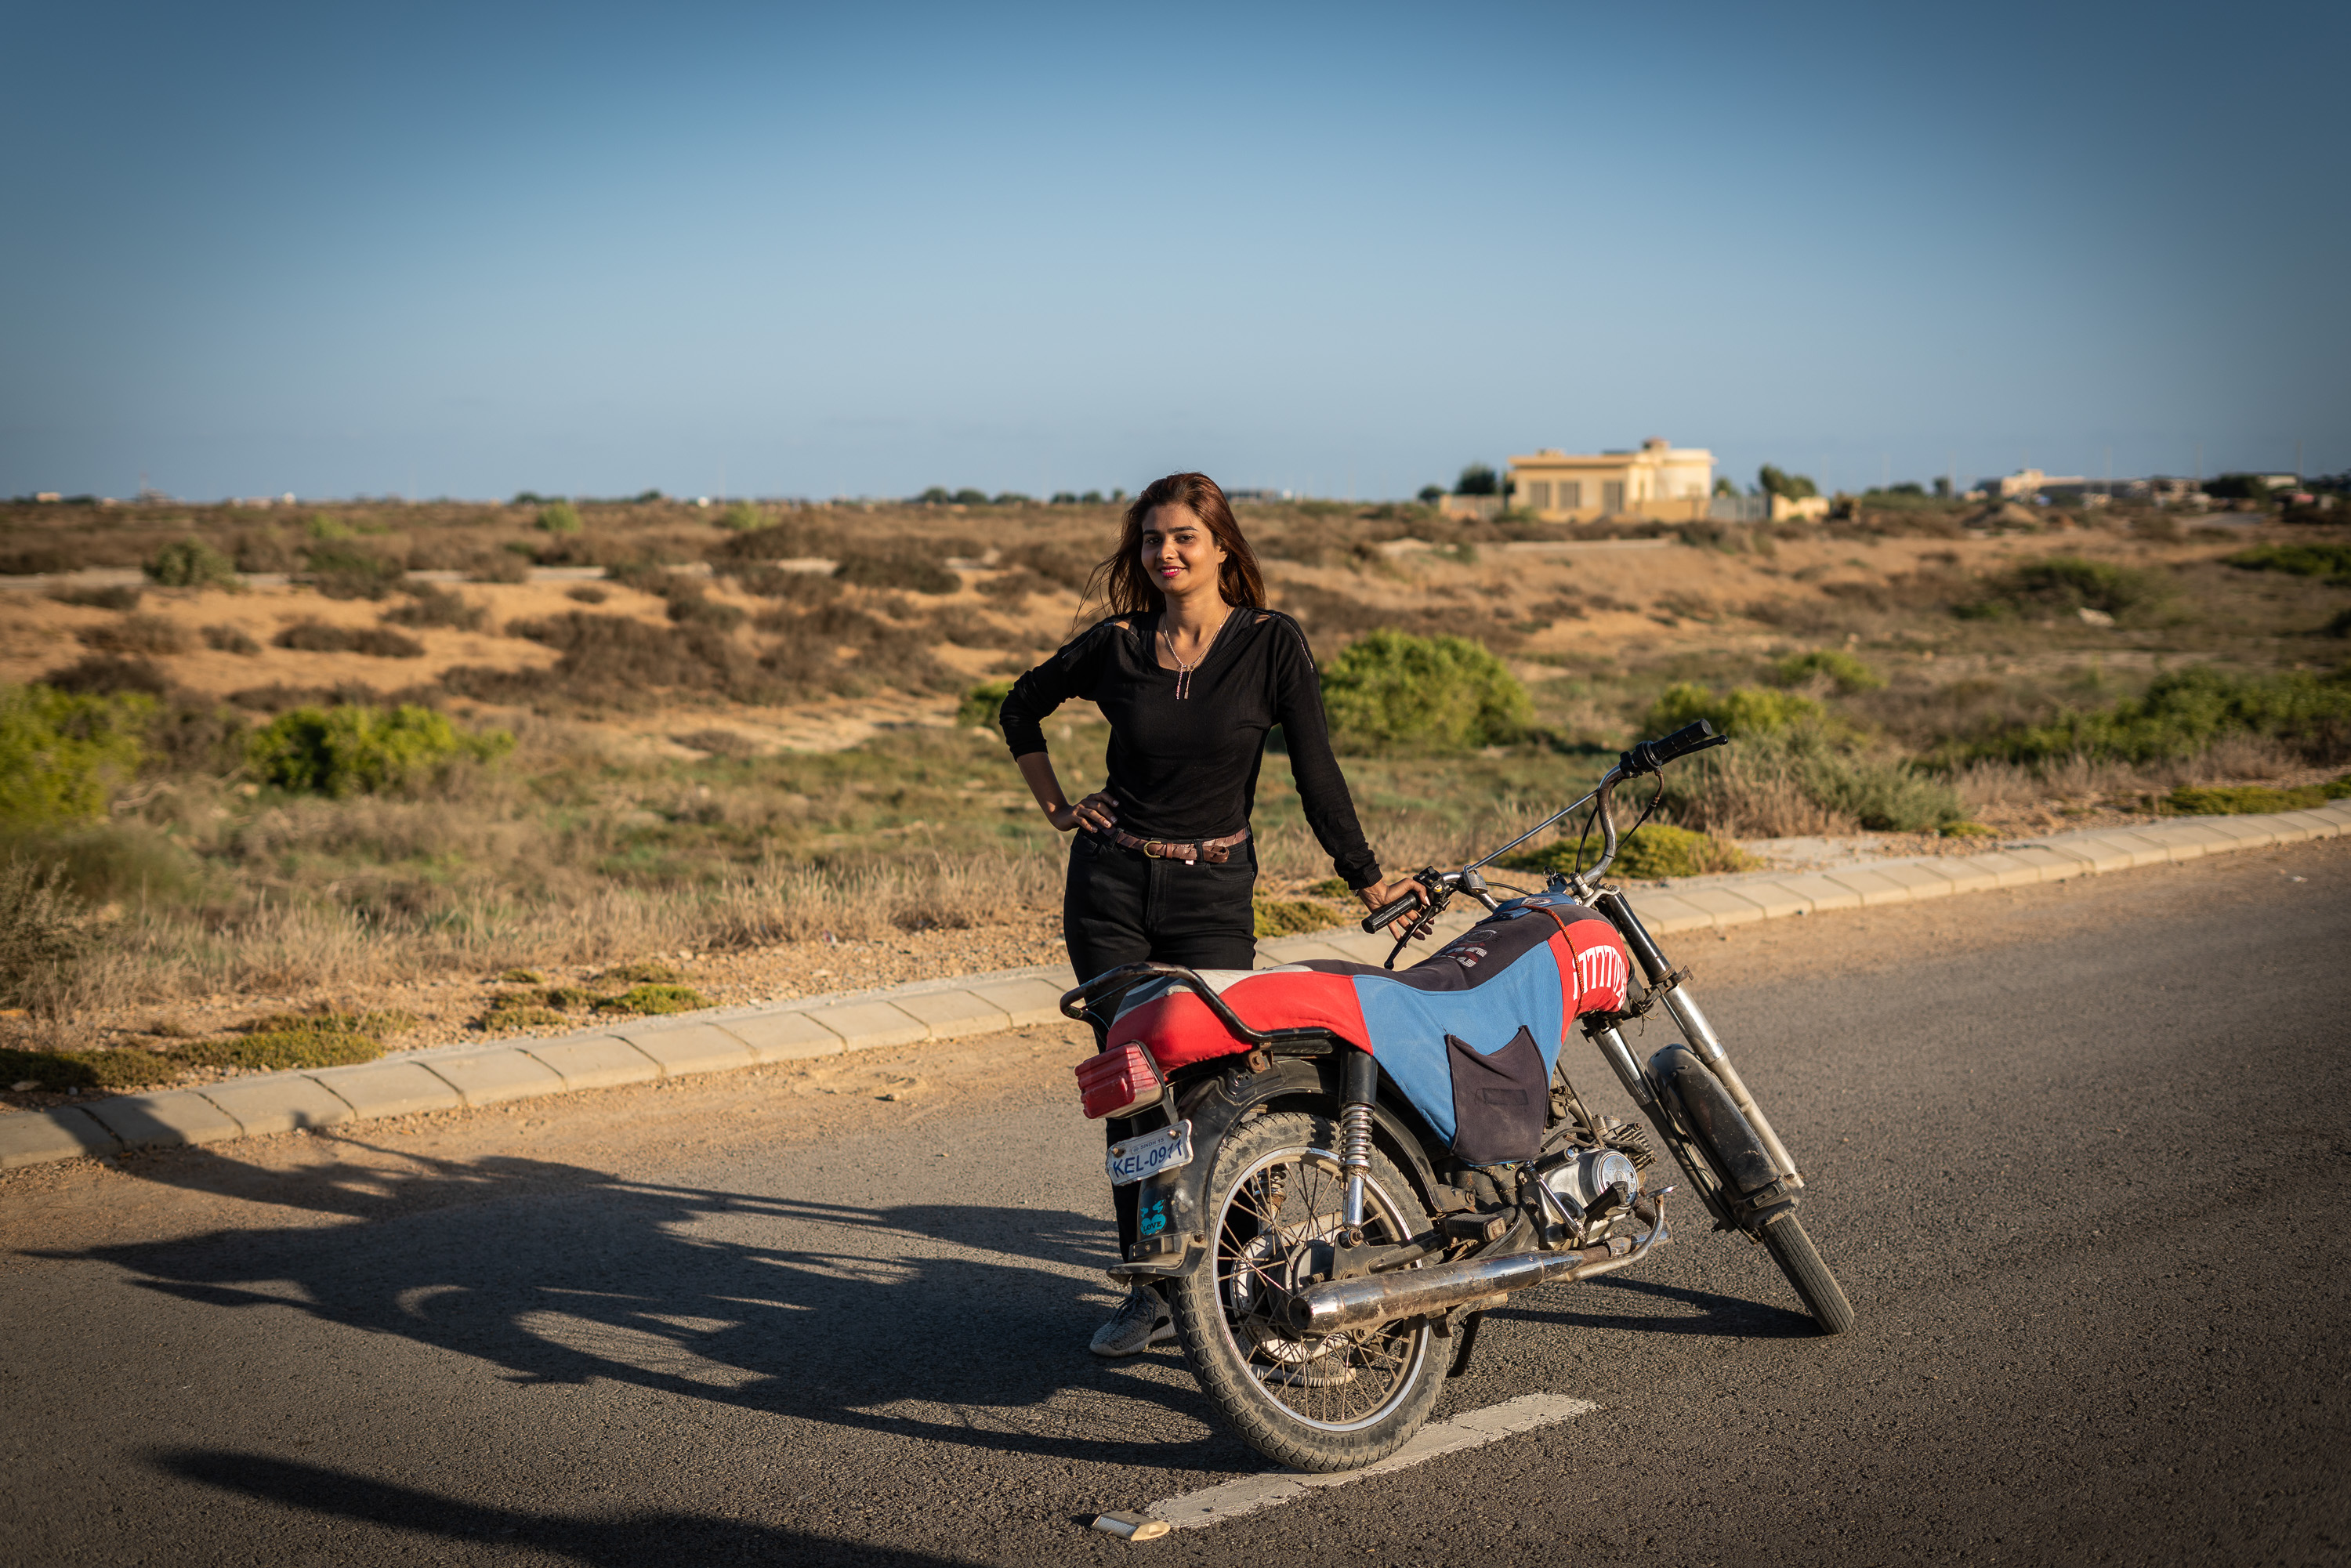 Khizra Ail works as a model and in television, and is now still learning to ride a motorbike with the Pink Riders in Karachi (photo: Philipp Breu)